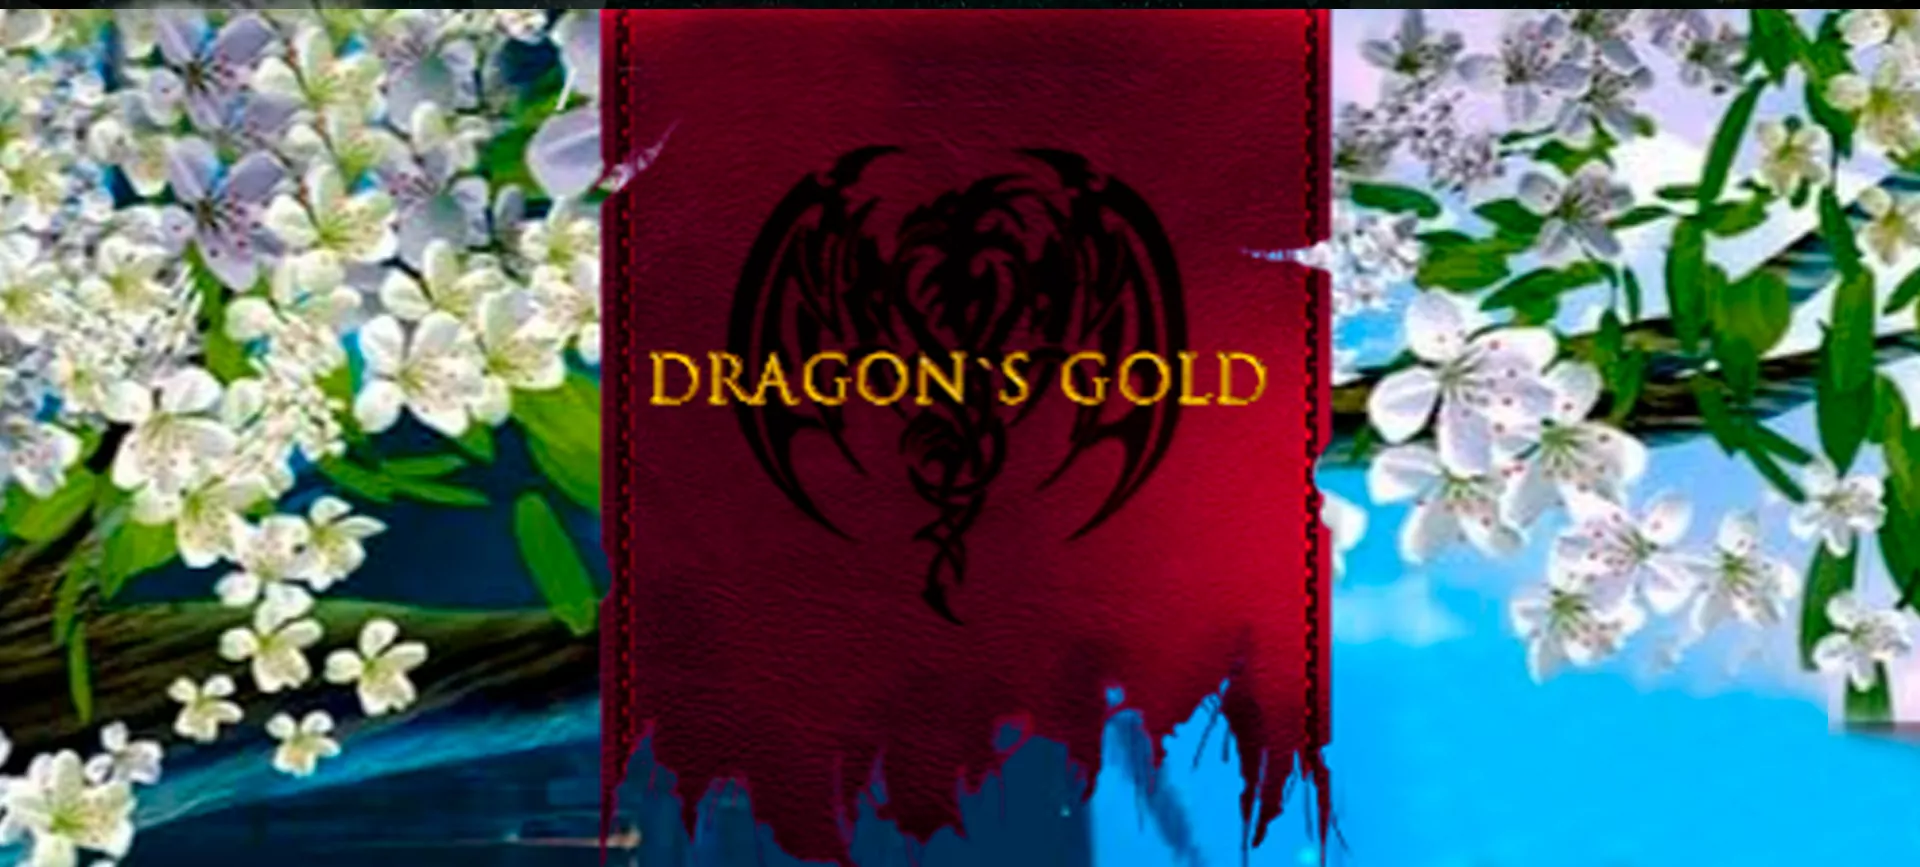 Play online in the Dragon's Gold game.